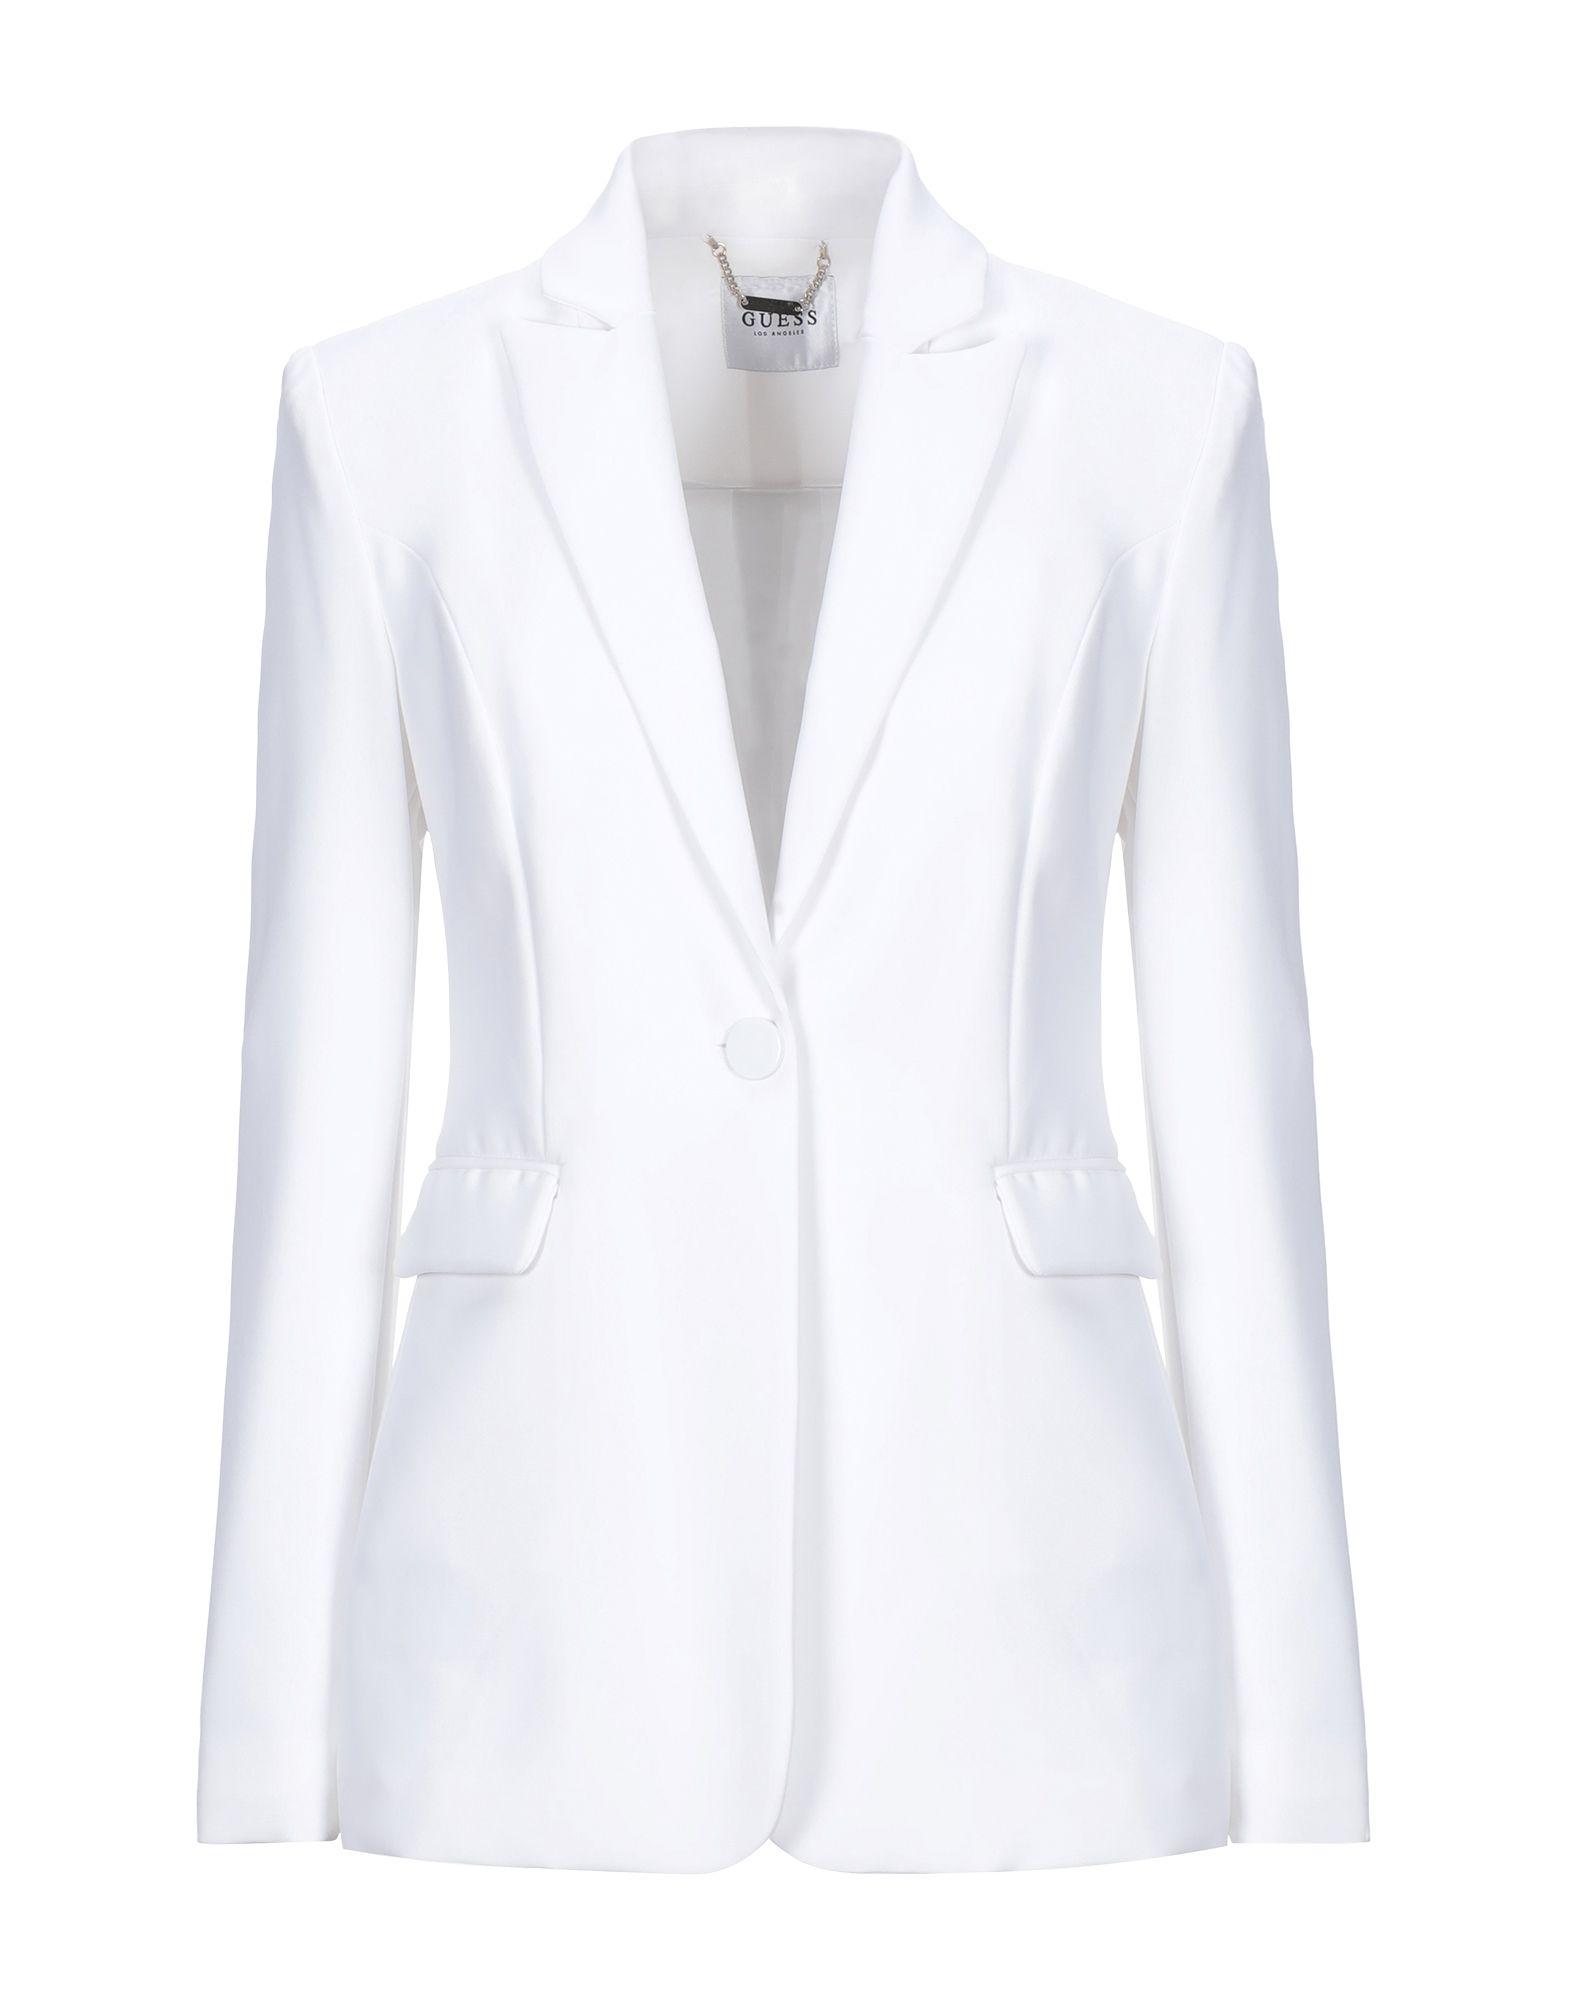 Guess Synthetic Suit Jacket in White | Lyst